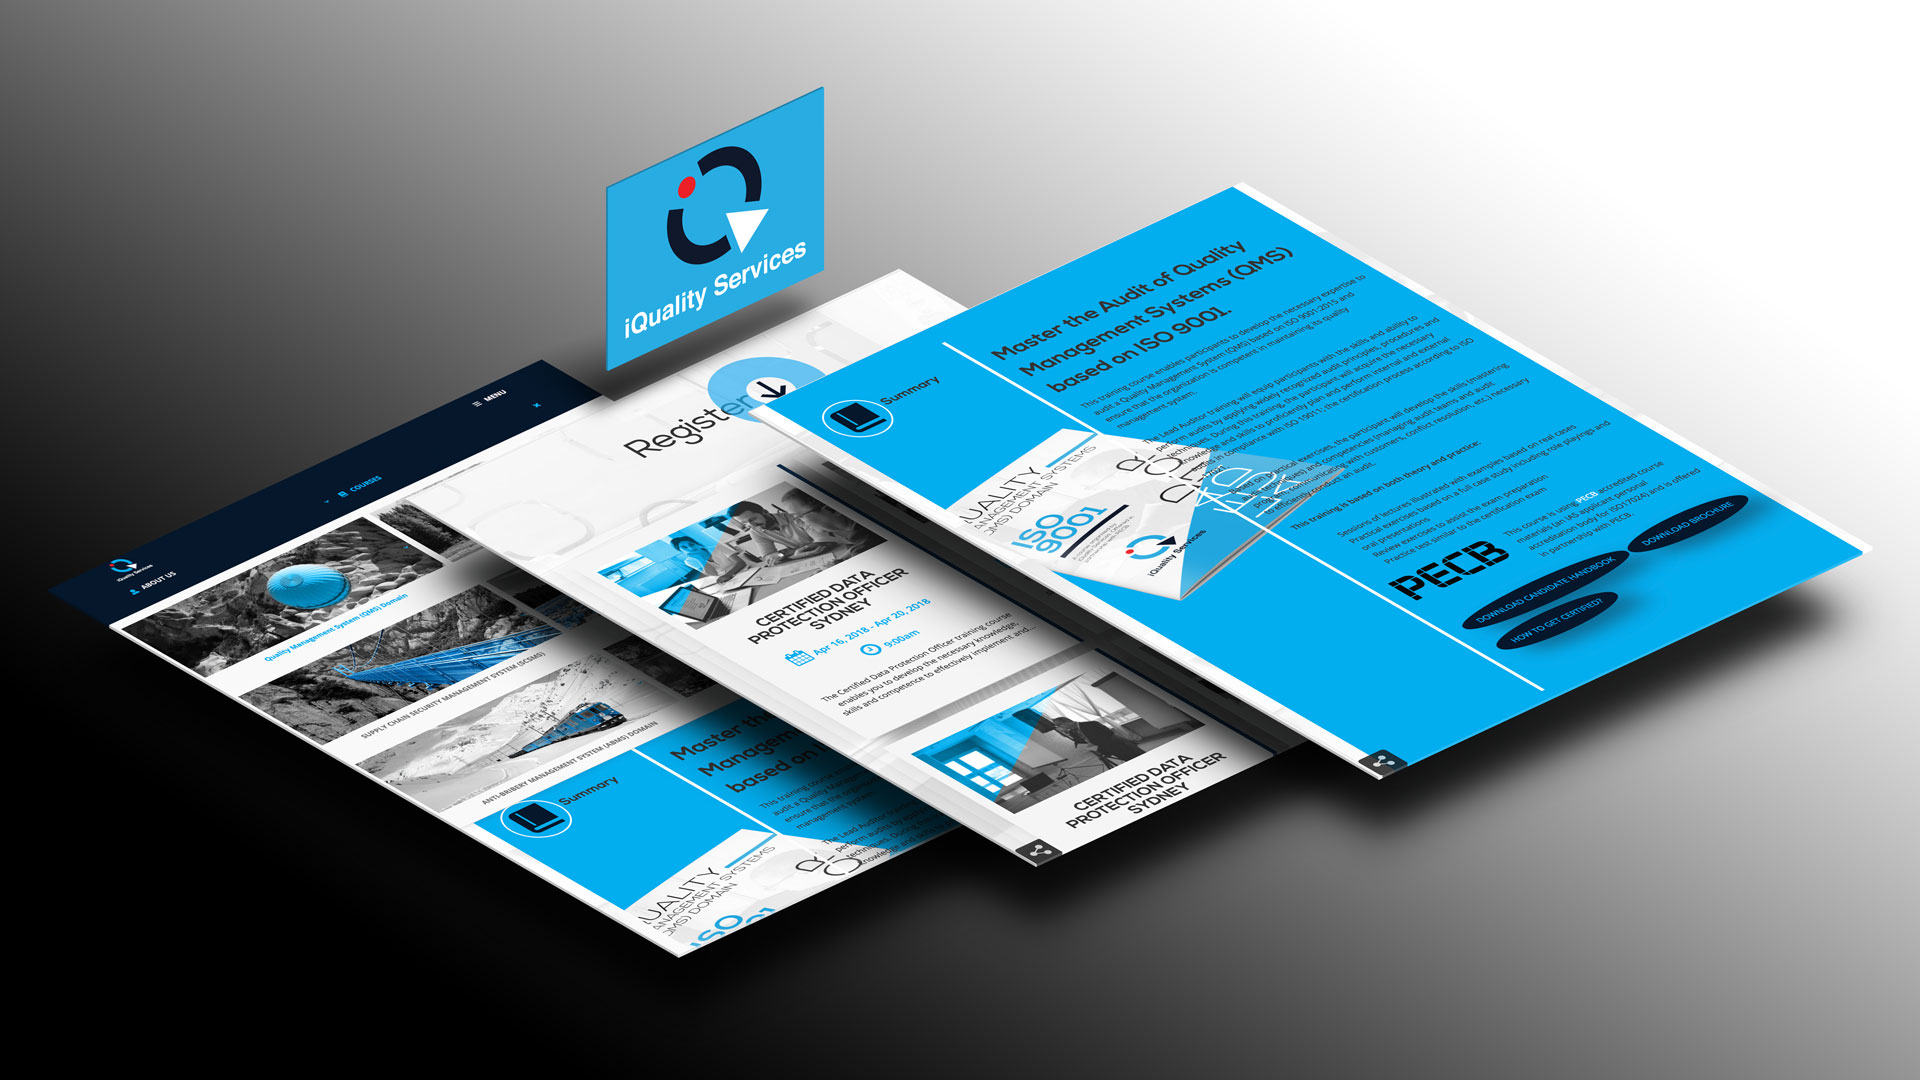 This illustration by PixelUp highlights the iQuality Services Project, focusing on segments of one of its course pages. It depicts three isometric iPad screens presenting different parts of the page, offering a glimpse into its design and arrangement. Vibrant blue tones are incorporated into the design, with a small blue card displaying their logo floating alongside. The iQuality Services Project is one of the endeavours pursued by PixelUp.